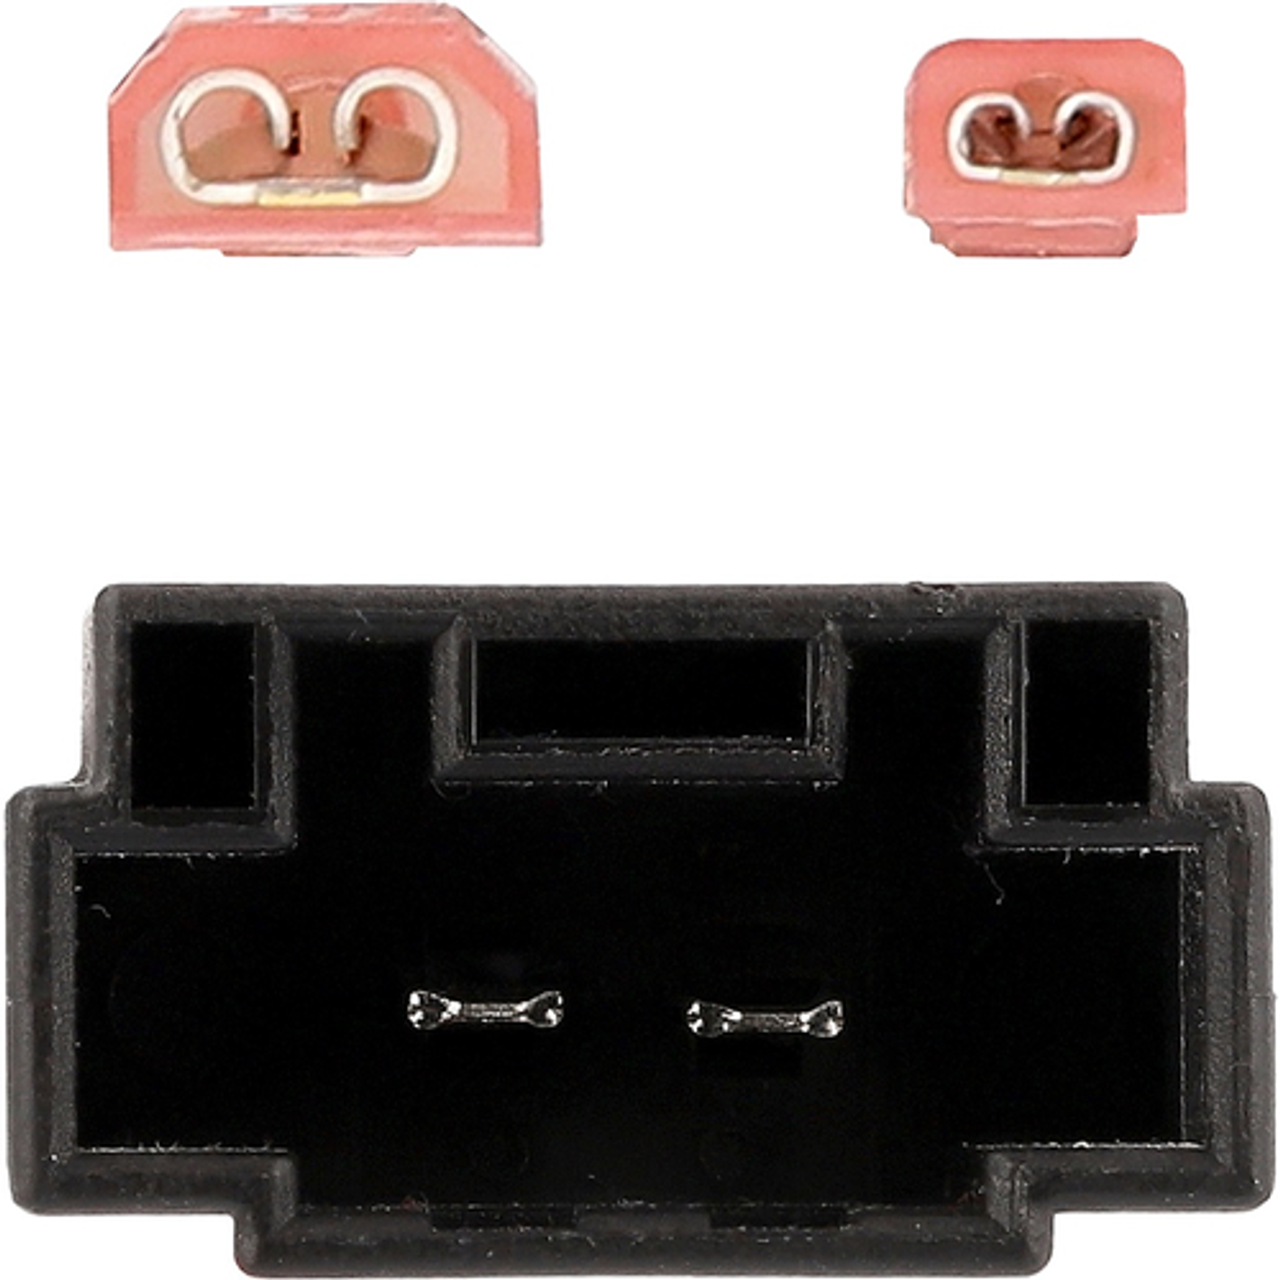 Metra - Speaker Harness for Most Mercedes-Benz Vehicles (2-Pack) - Multi